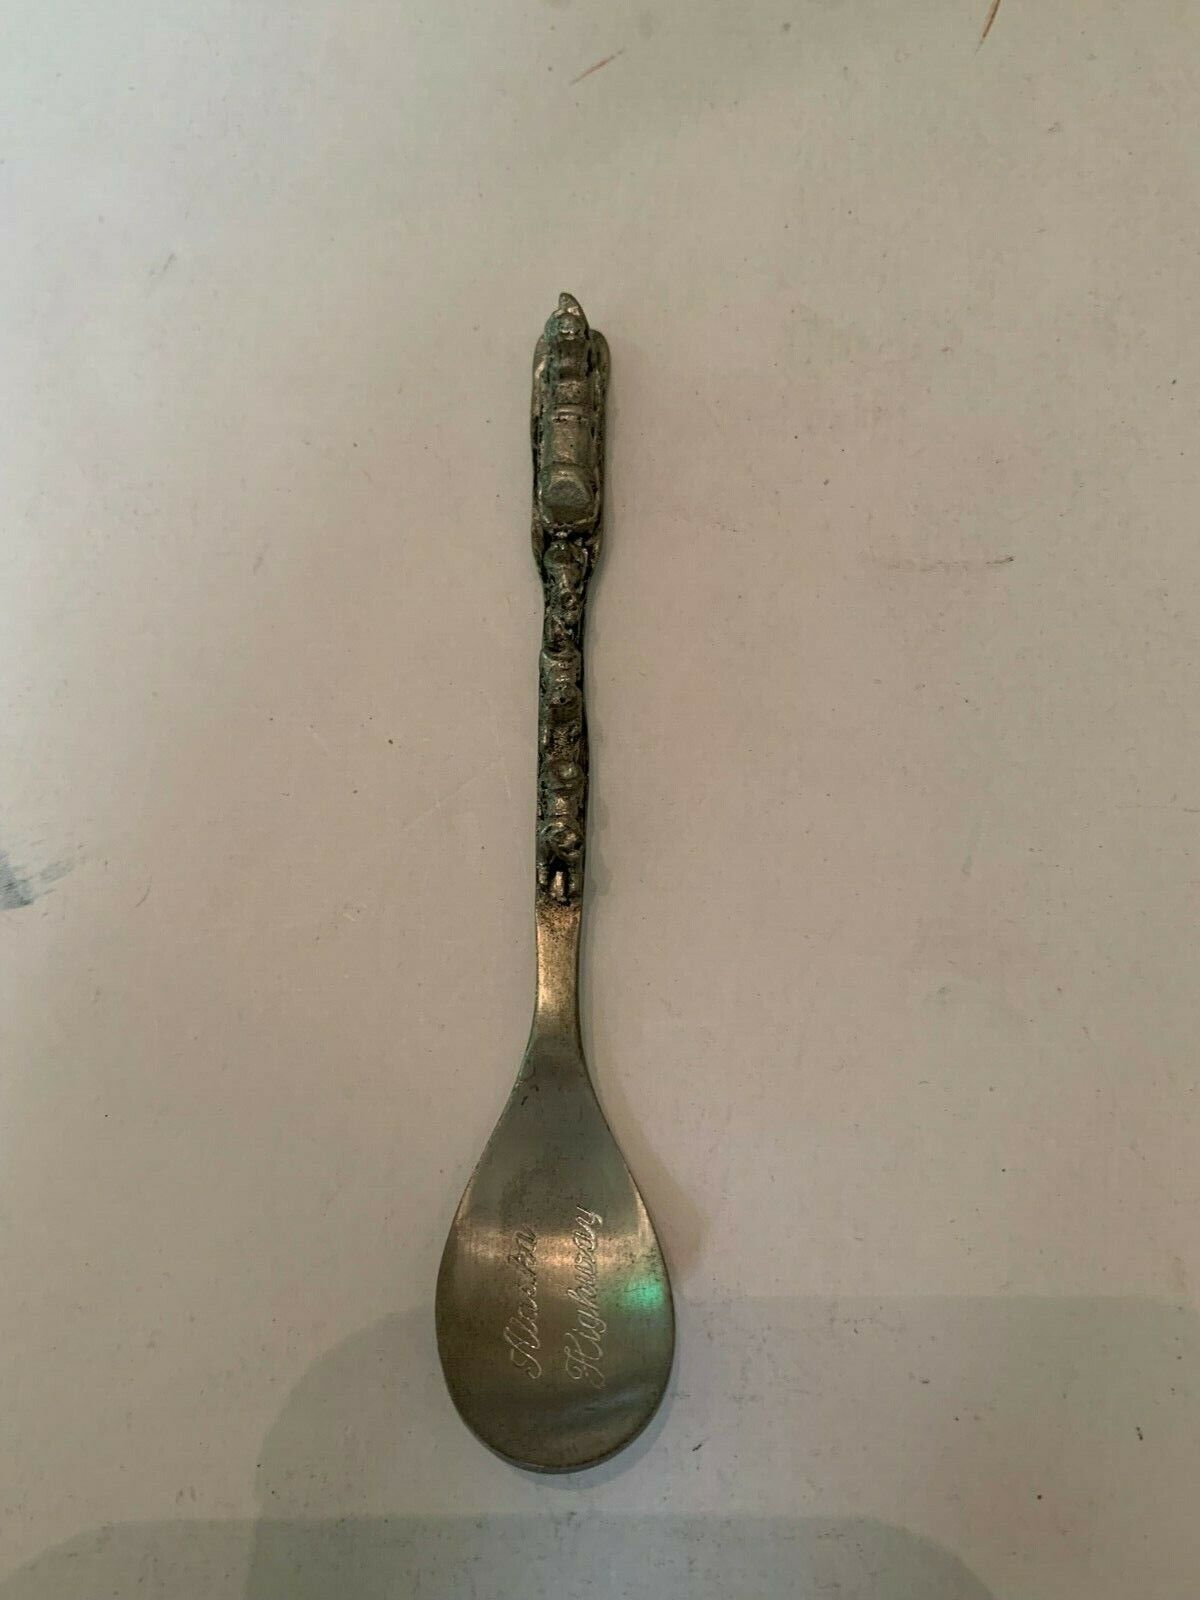 1985 Alaska Highway Dog Sled Pewter Souvenir Spoon Made In Canada